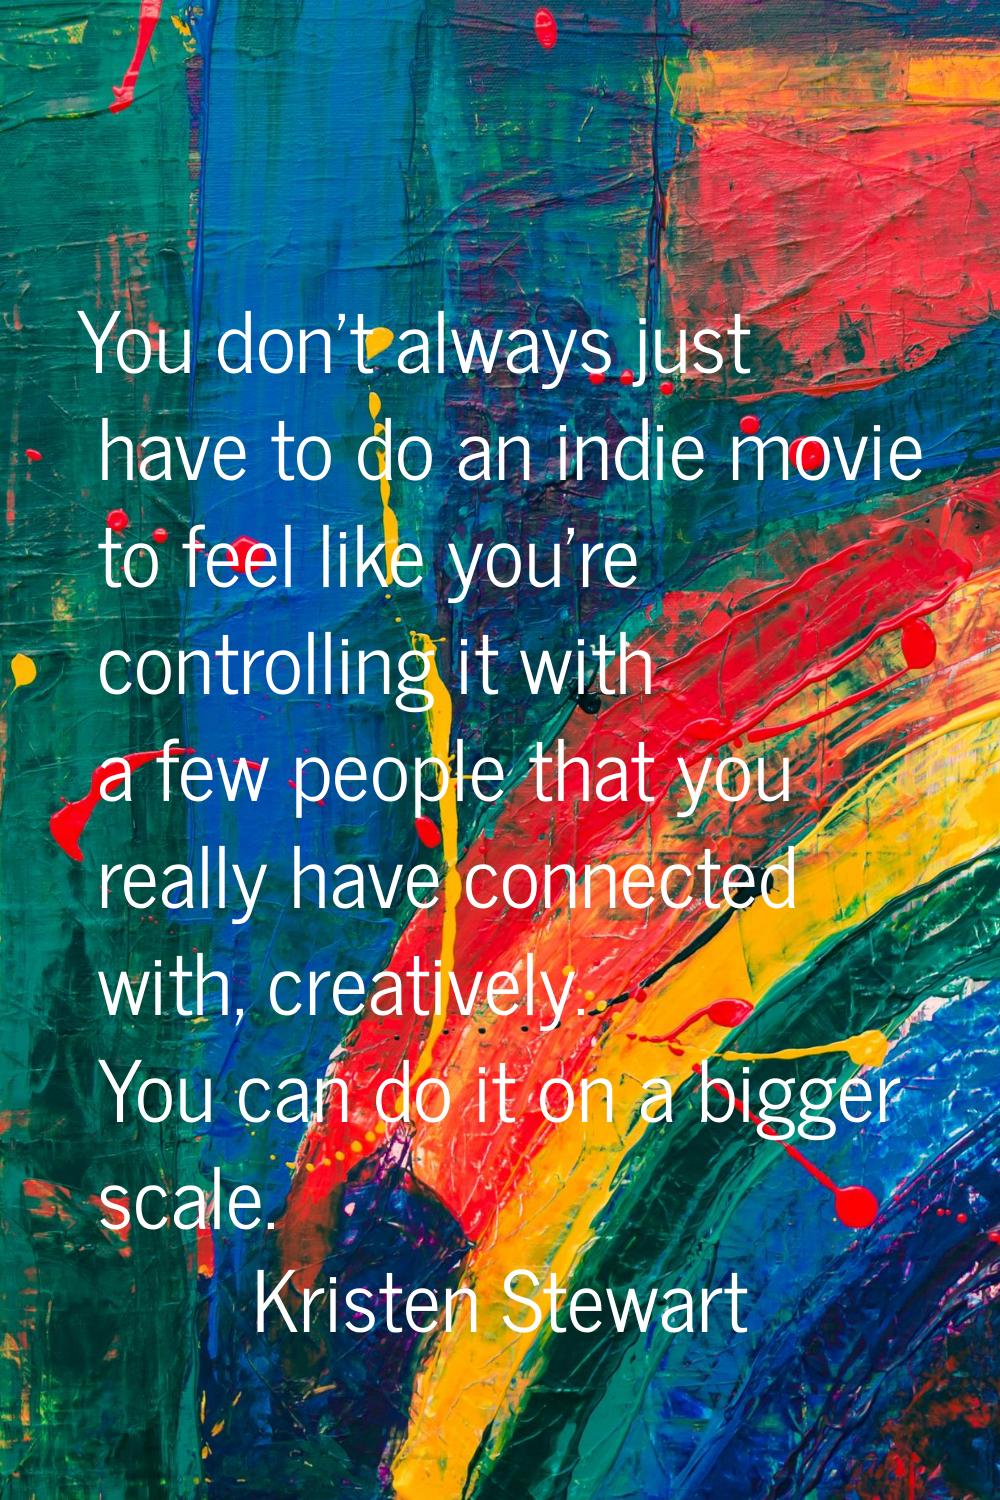 You don't always just have to do an indie movie to feel like you're controlling it with a few peopl